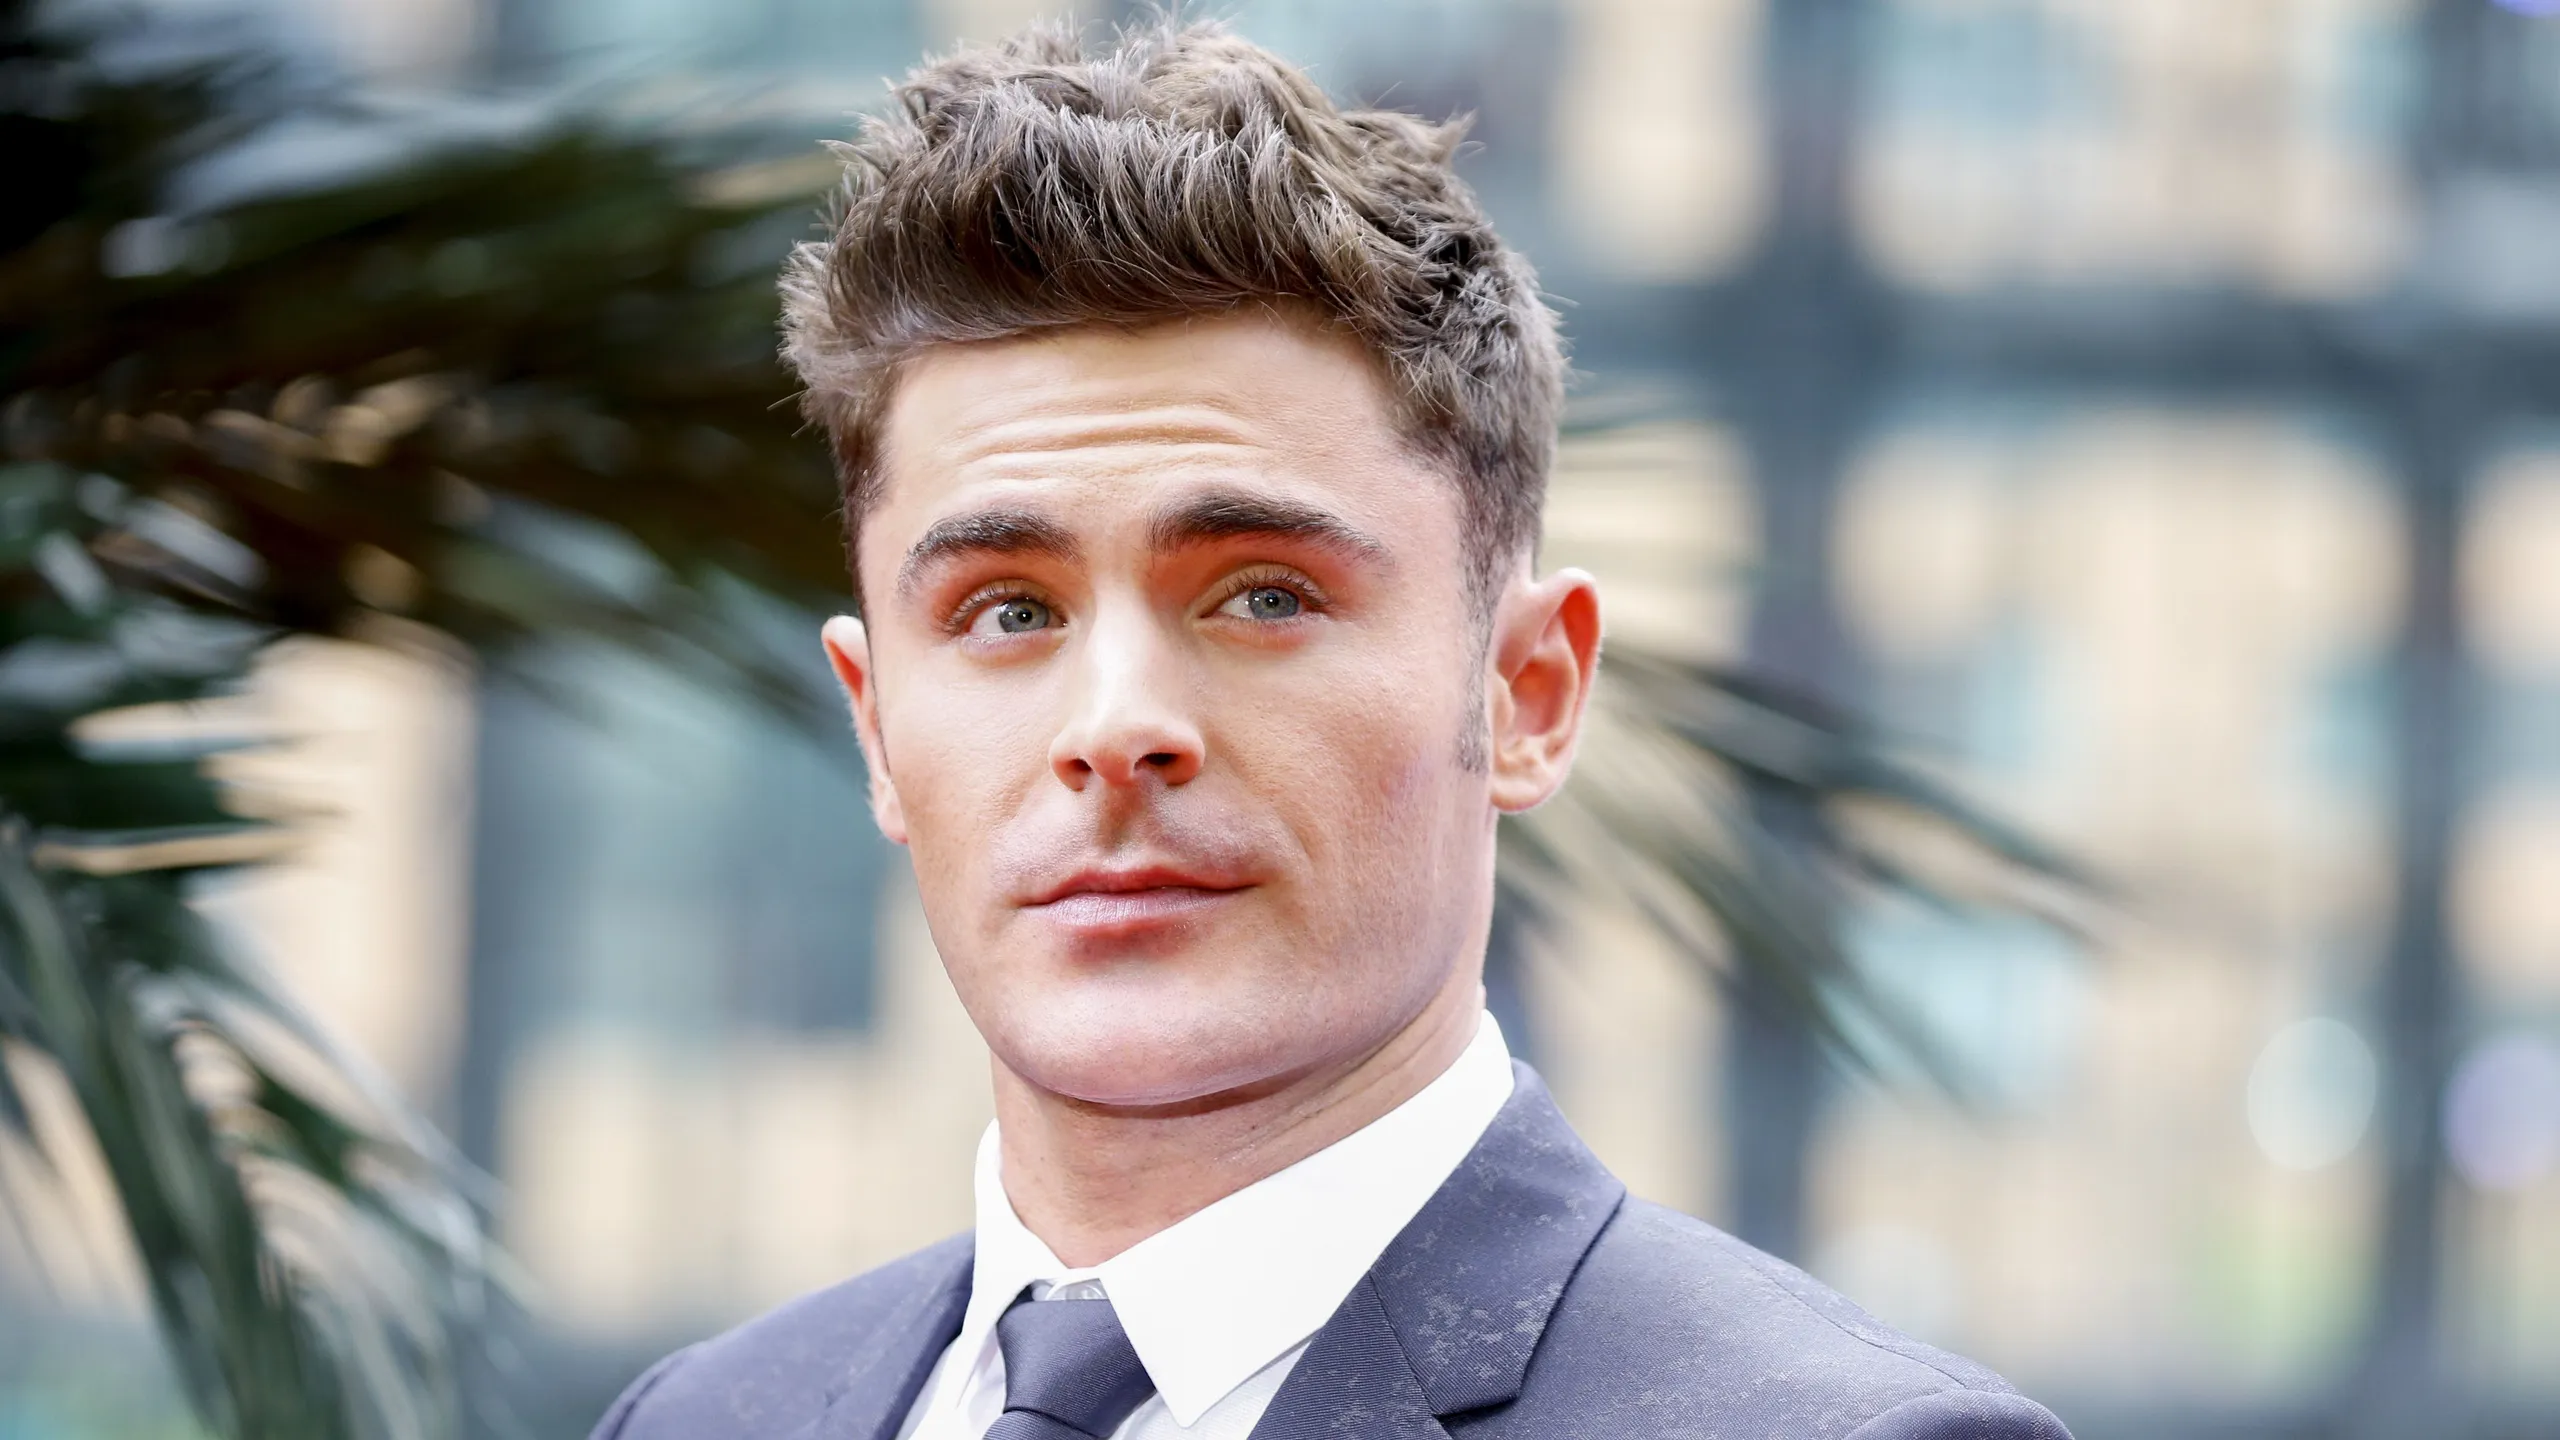 7 Most Famous Zac Efron Hairstyles – Cool Men's Hair